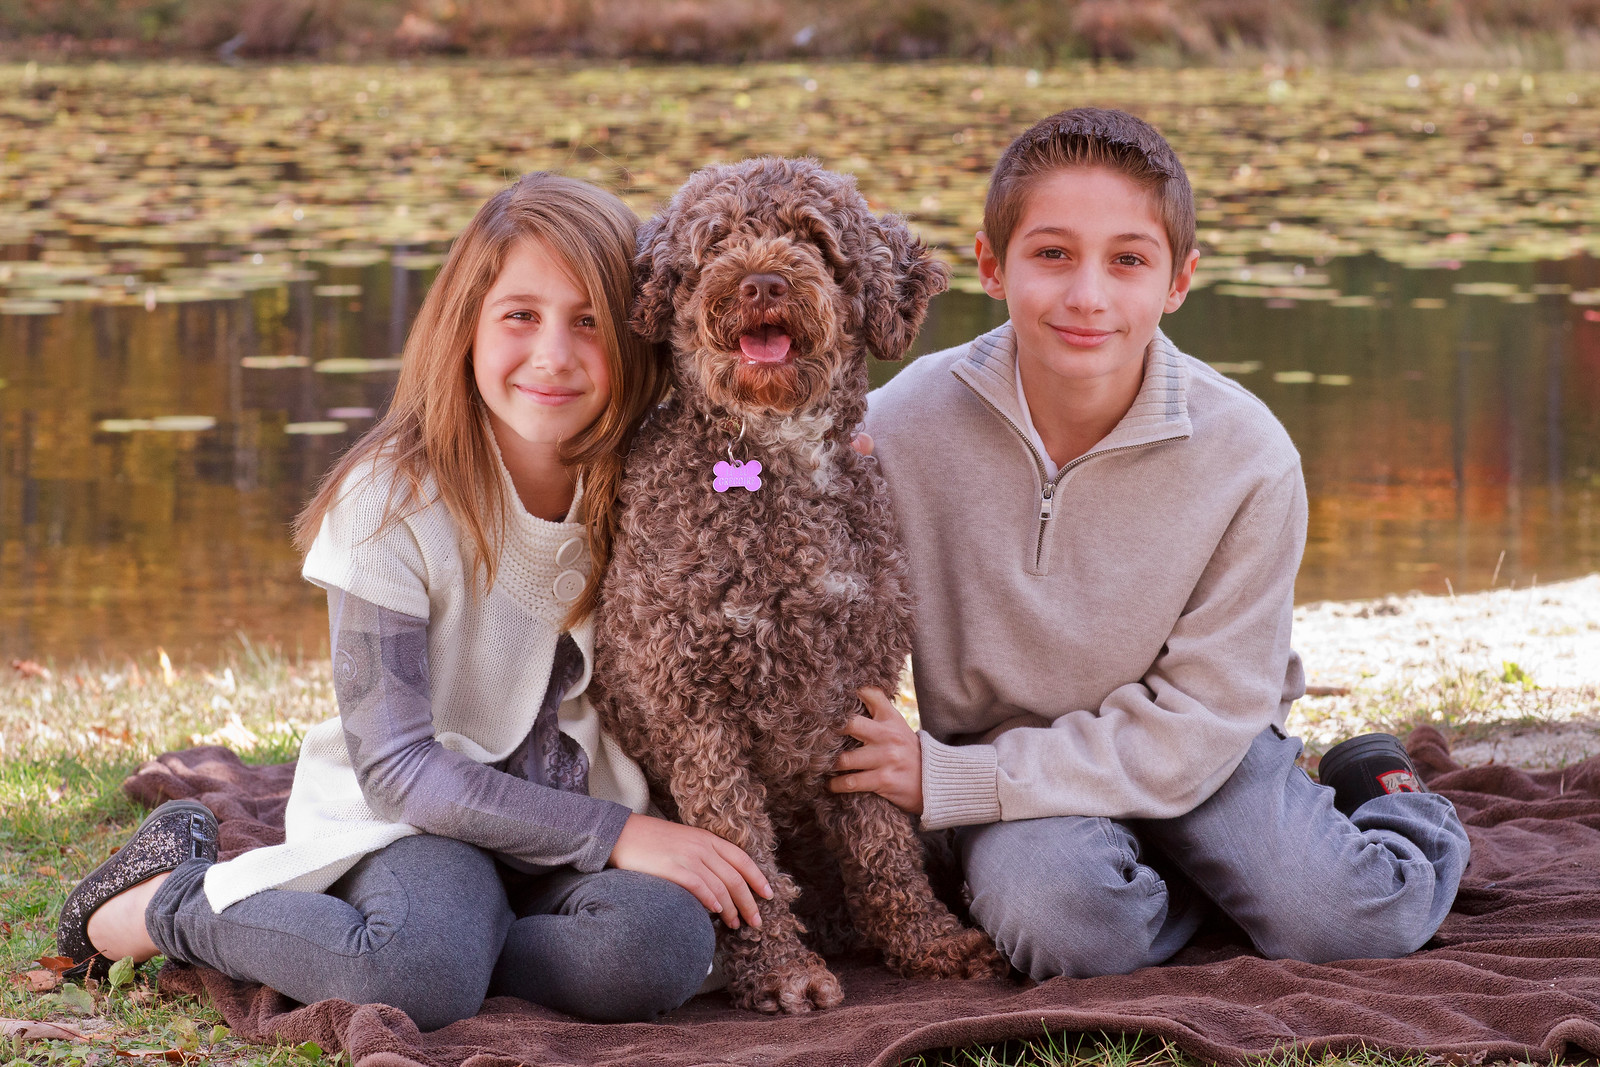 pet photography, dog portraits, families and pets, capturing pet personalities